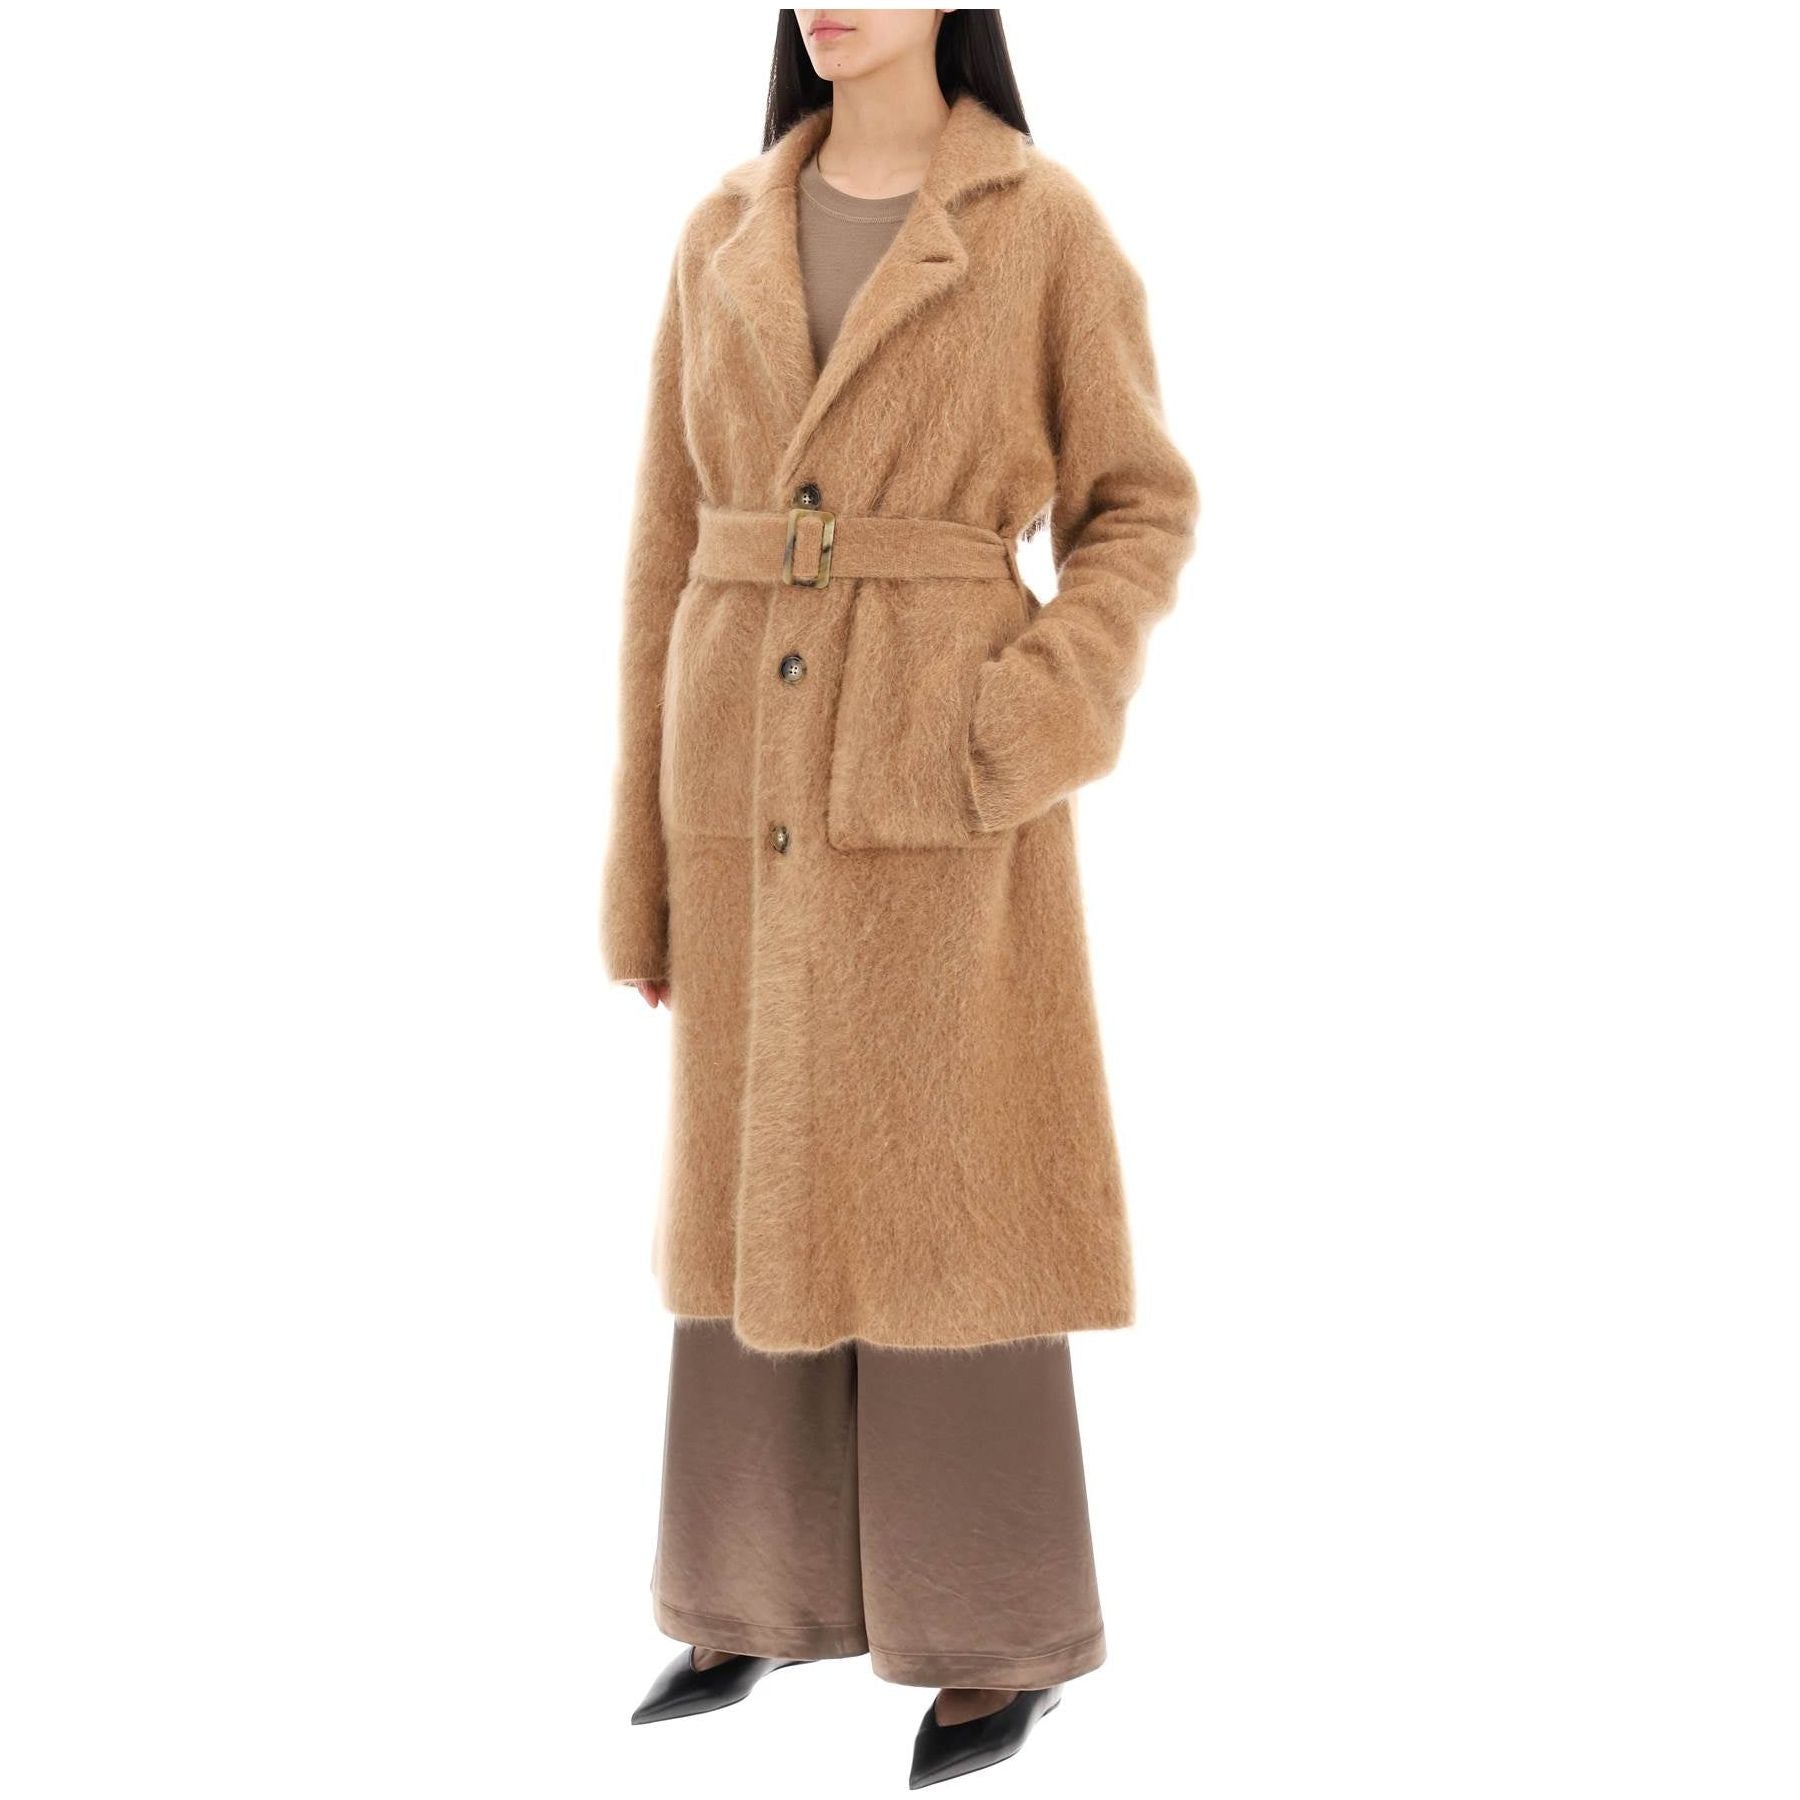 Grizzly Wash Cashmere Coat